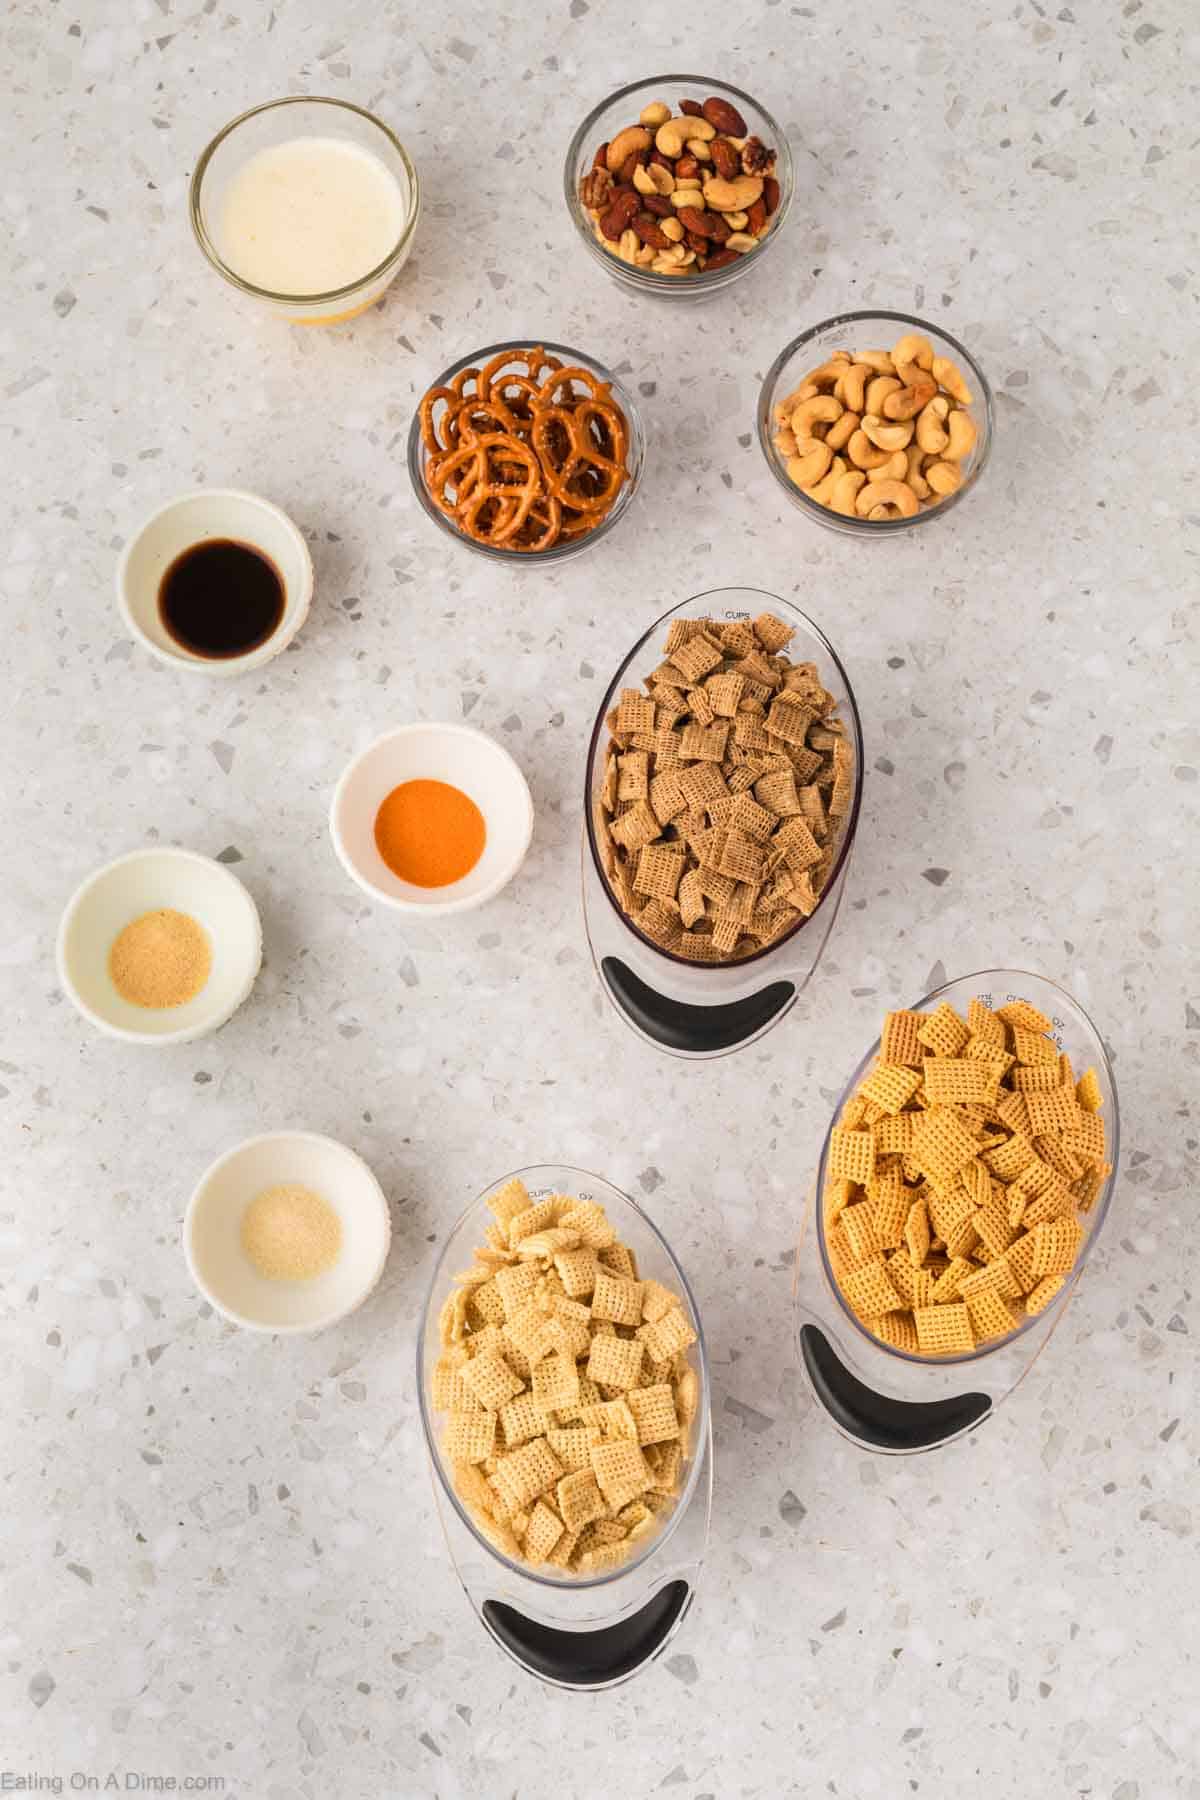 Chex Mix Ingredients - rice chex cereal, corn chex cereal, butter, wheat chex cereal, mini pretzels, onion powder, mixed nuts, cashews, worcestershire sauce, seasoned salt, garlic powder